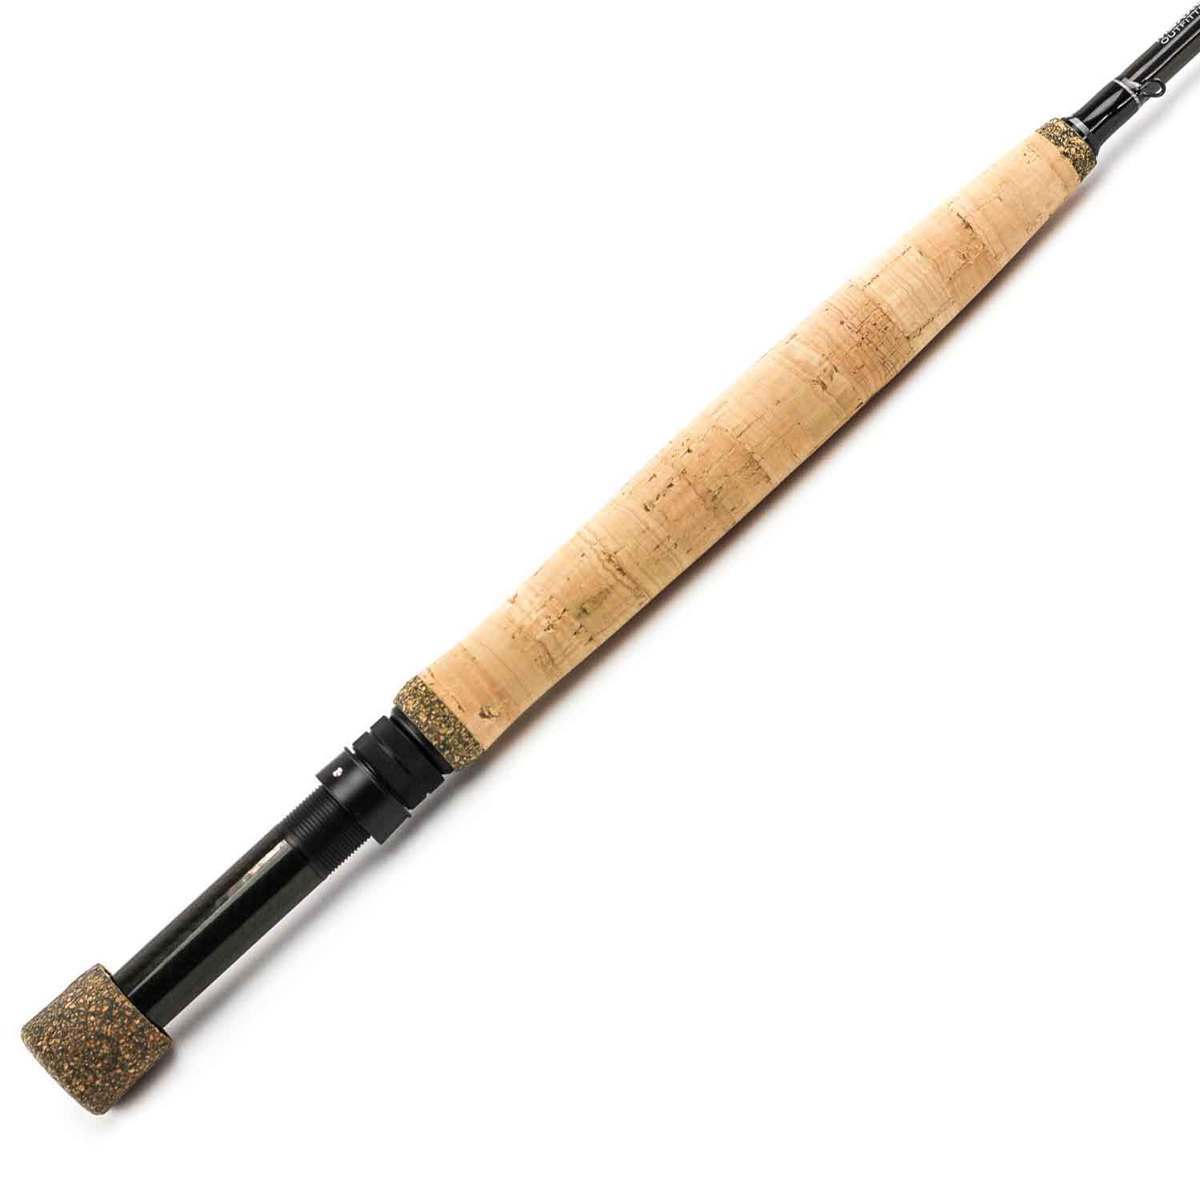 Maxxon Outfitters NX Nymphing Fly Fishing Rod by Sportsman's Warehouse